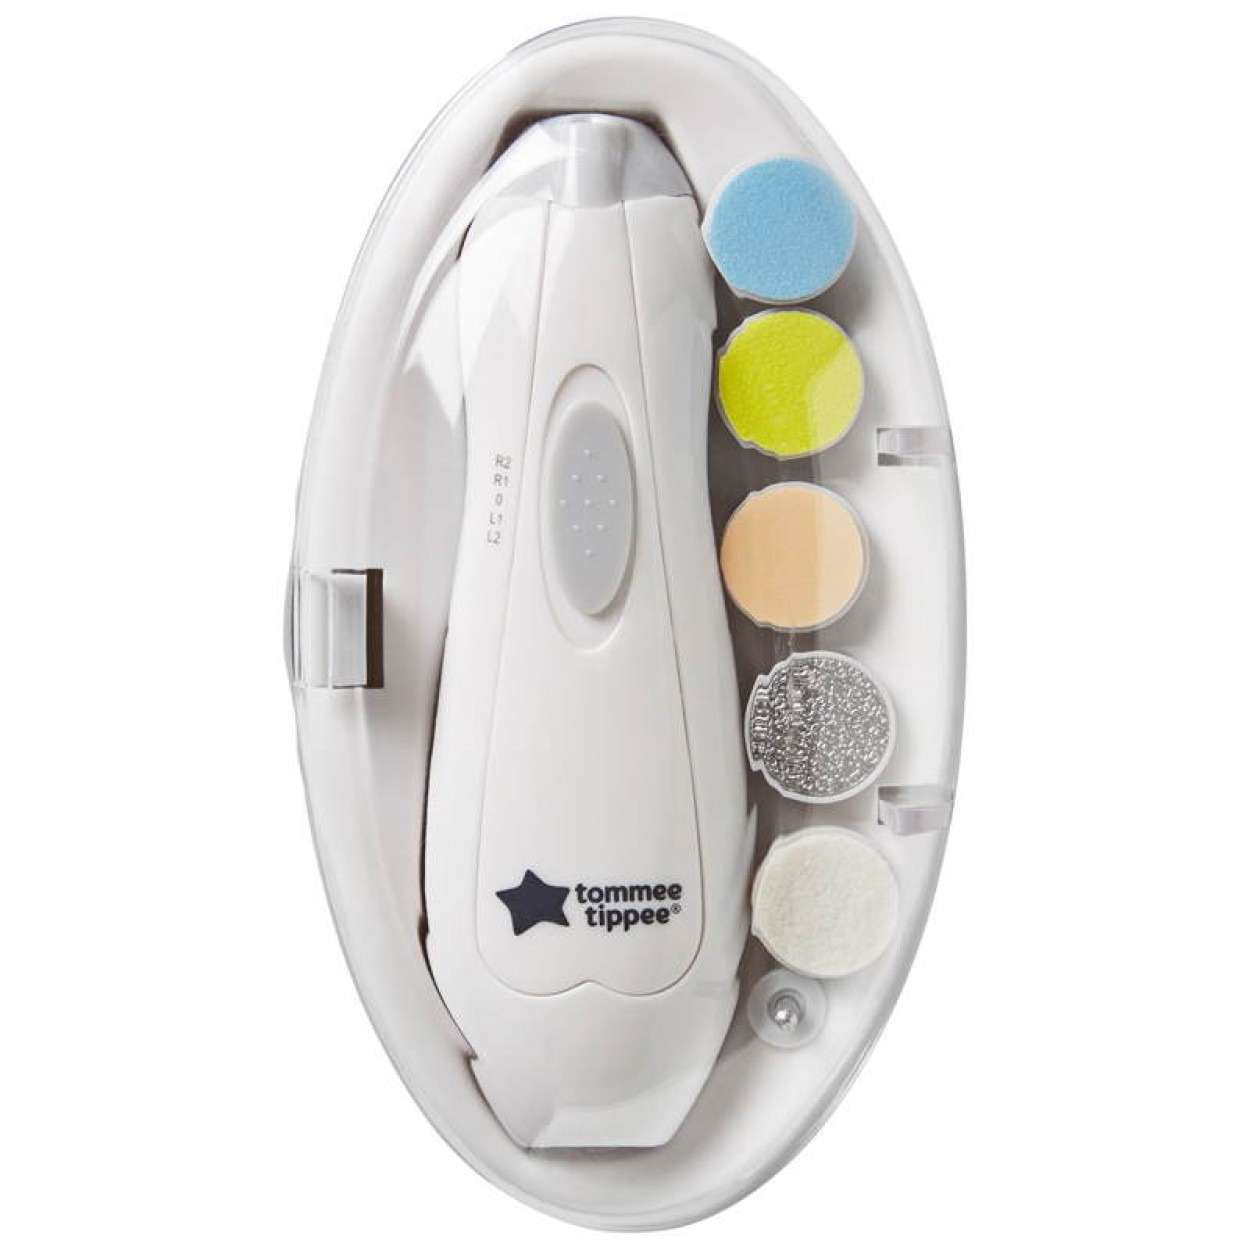 Tommee Tippee Nail Care, 6 Nail Care Heads